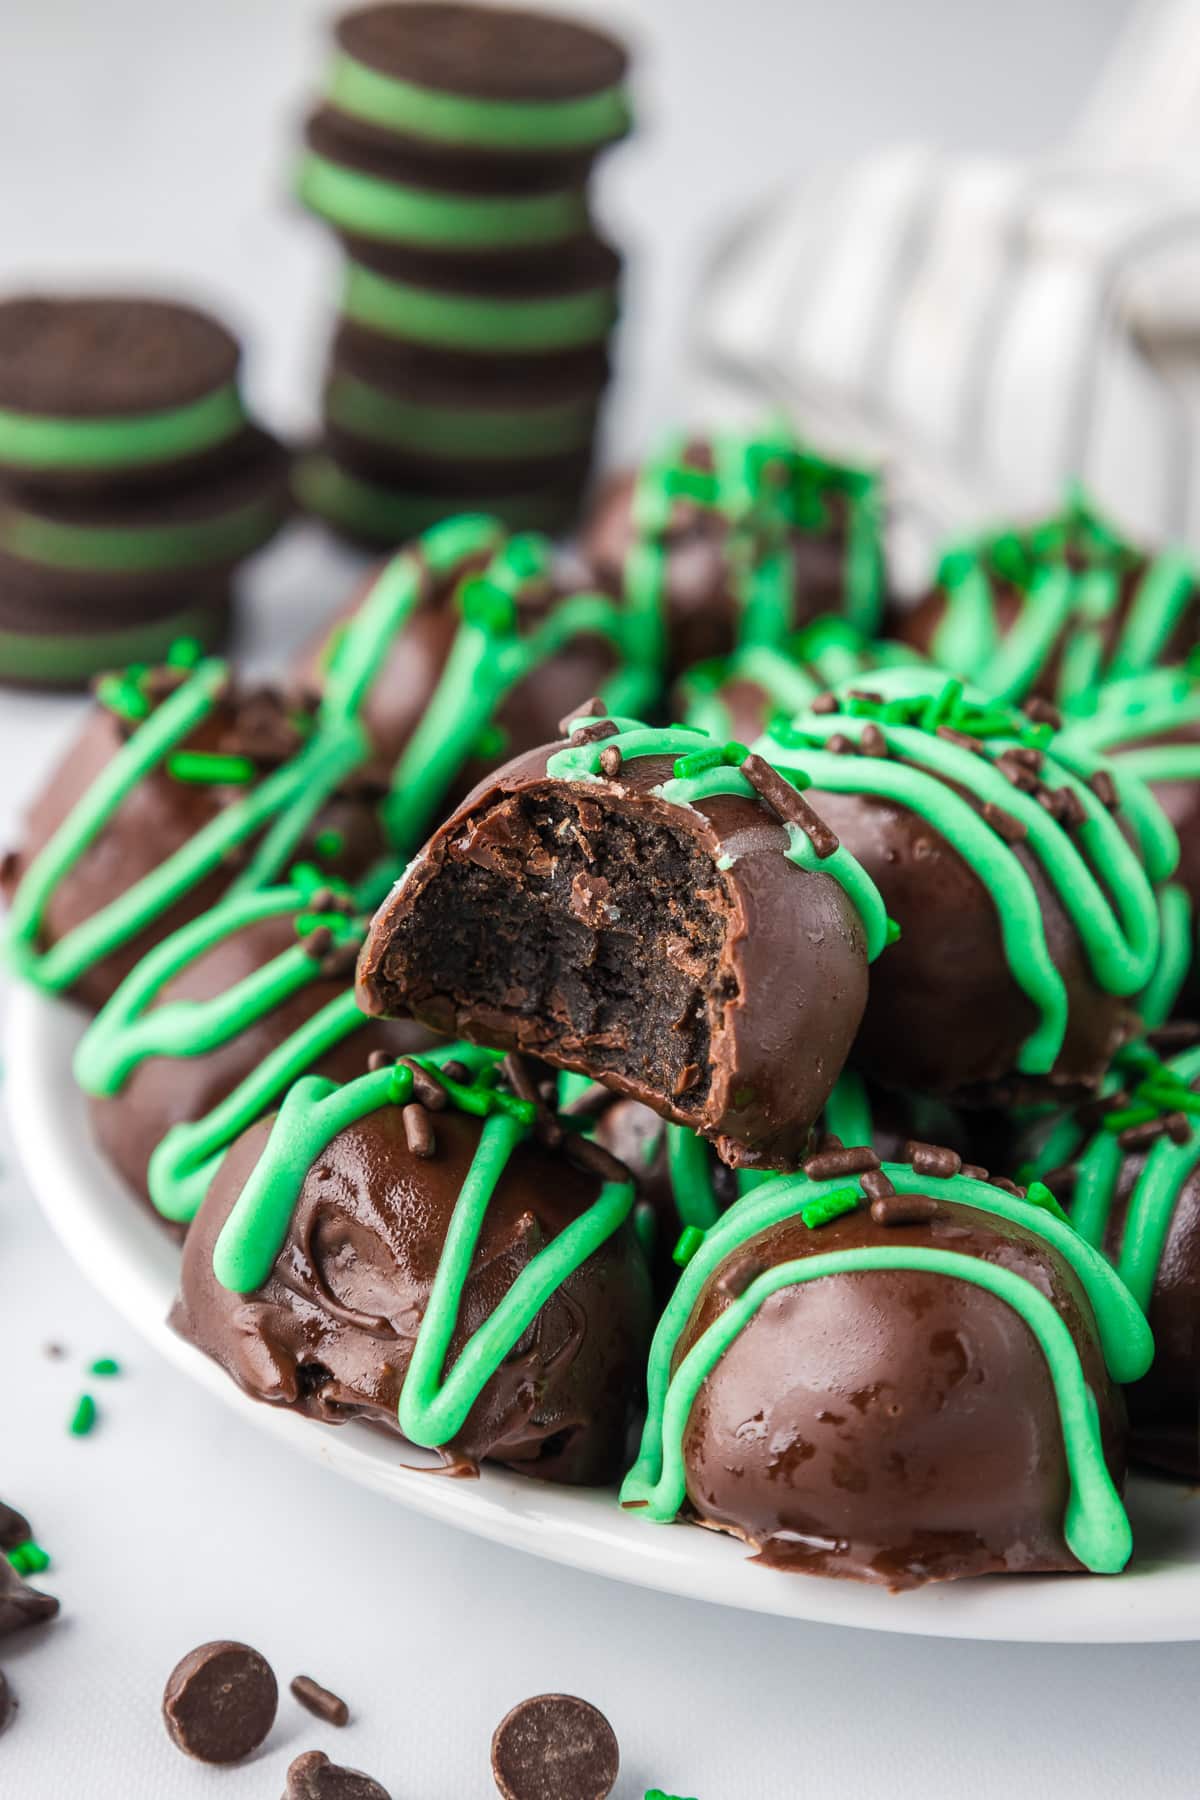 Mint oreo truffles with green drizzled chocolate piled on a plate with one missing a bite.